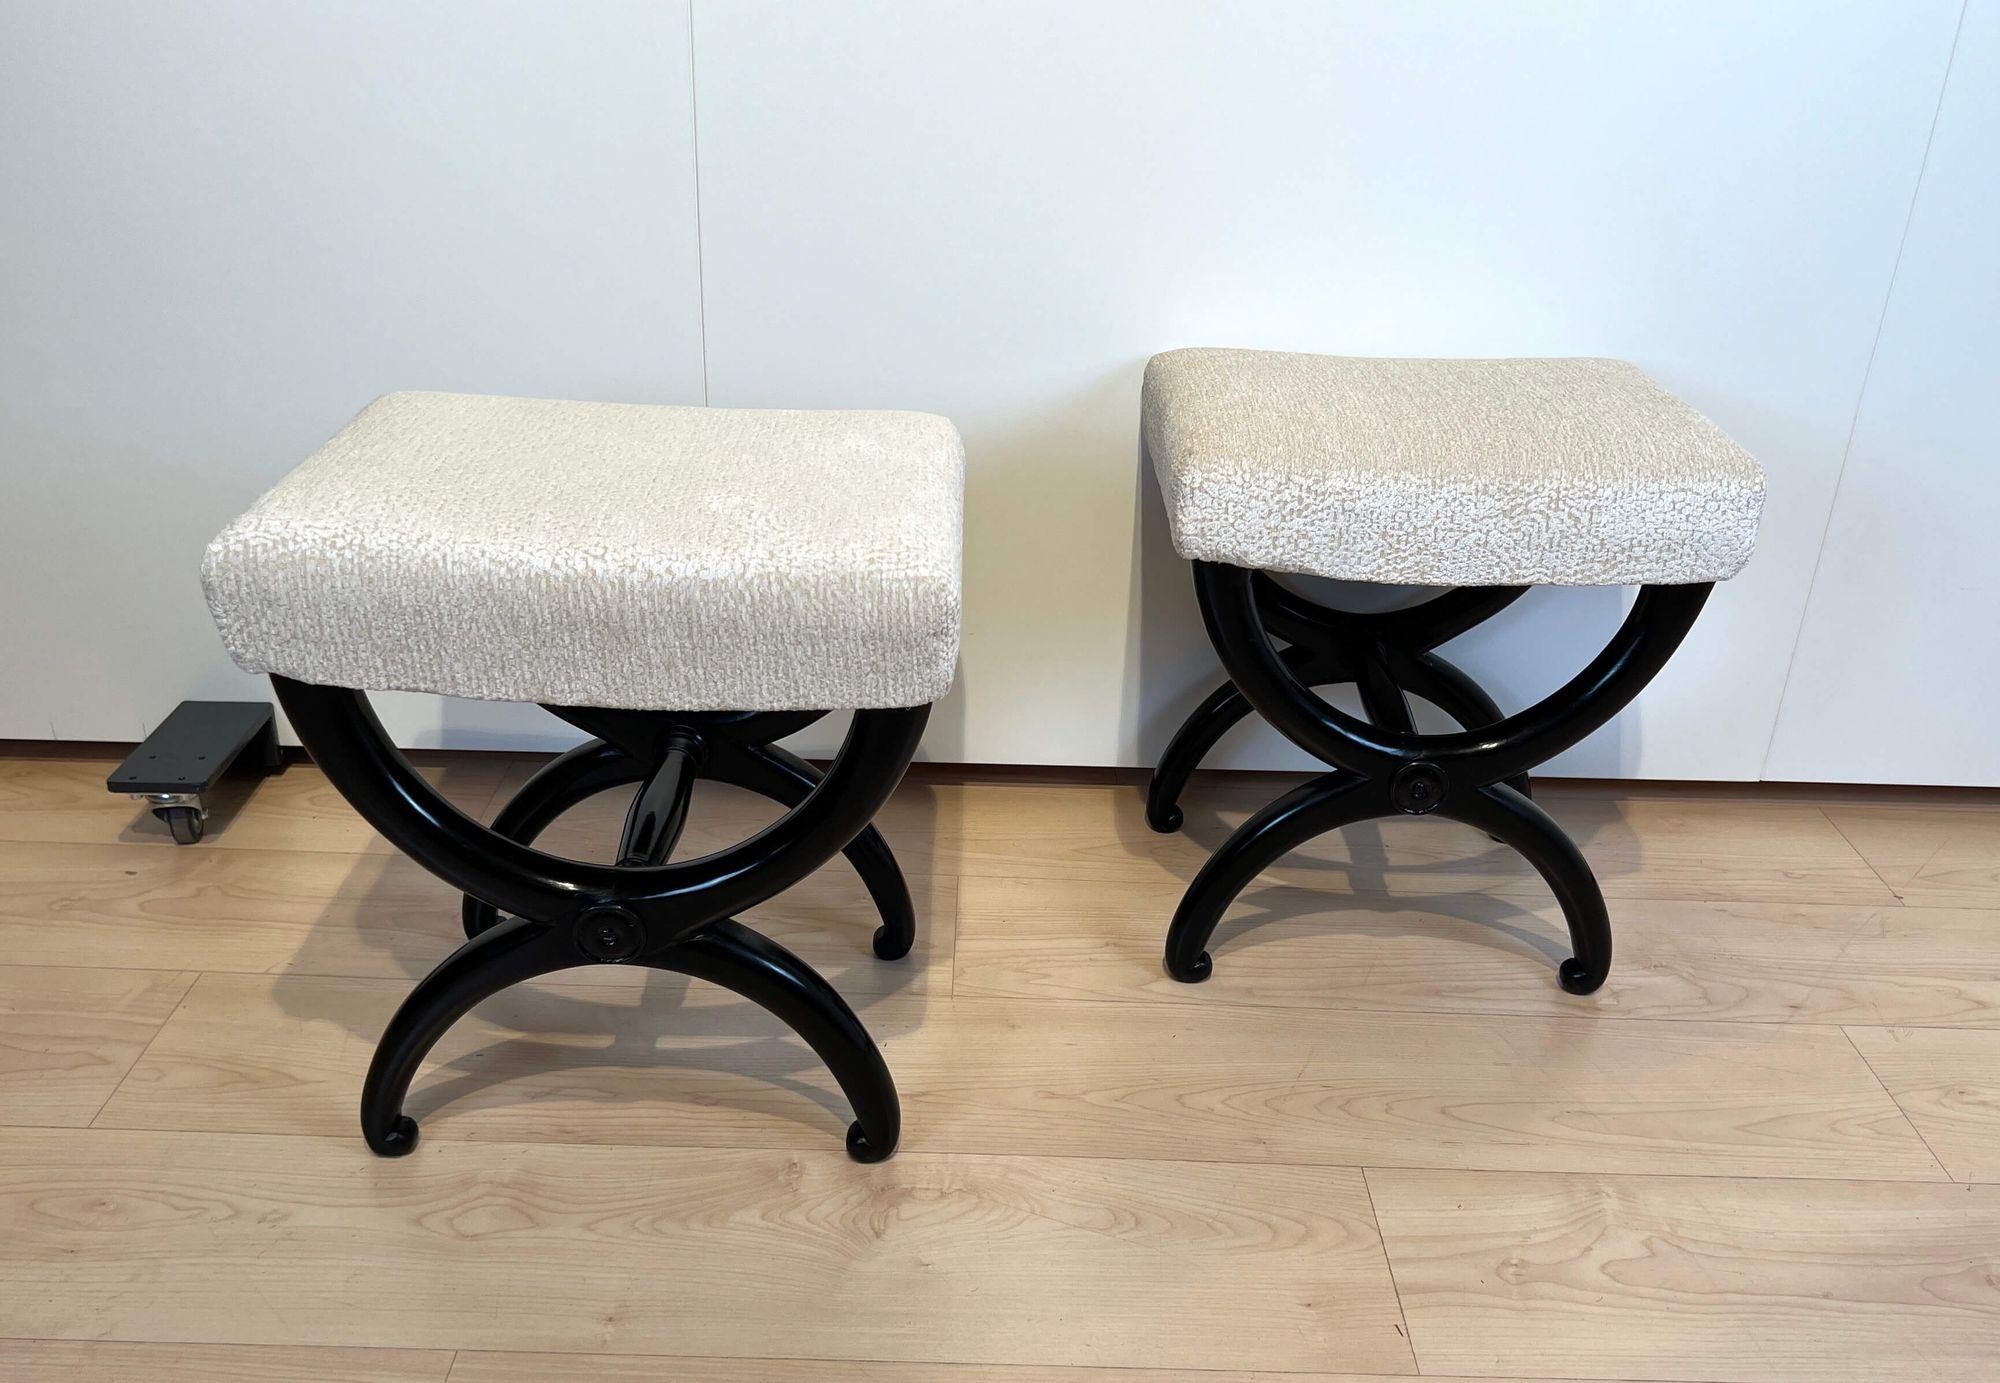 French Pair of Antique Stools, Ebonized Beech Wood, Creme Fabric, France circa 1820 For Sale